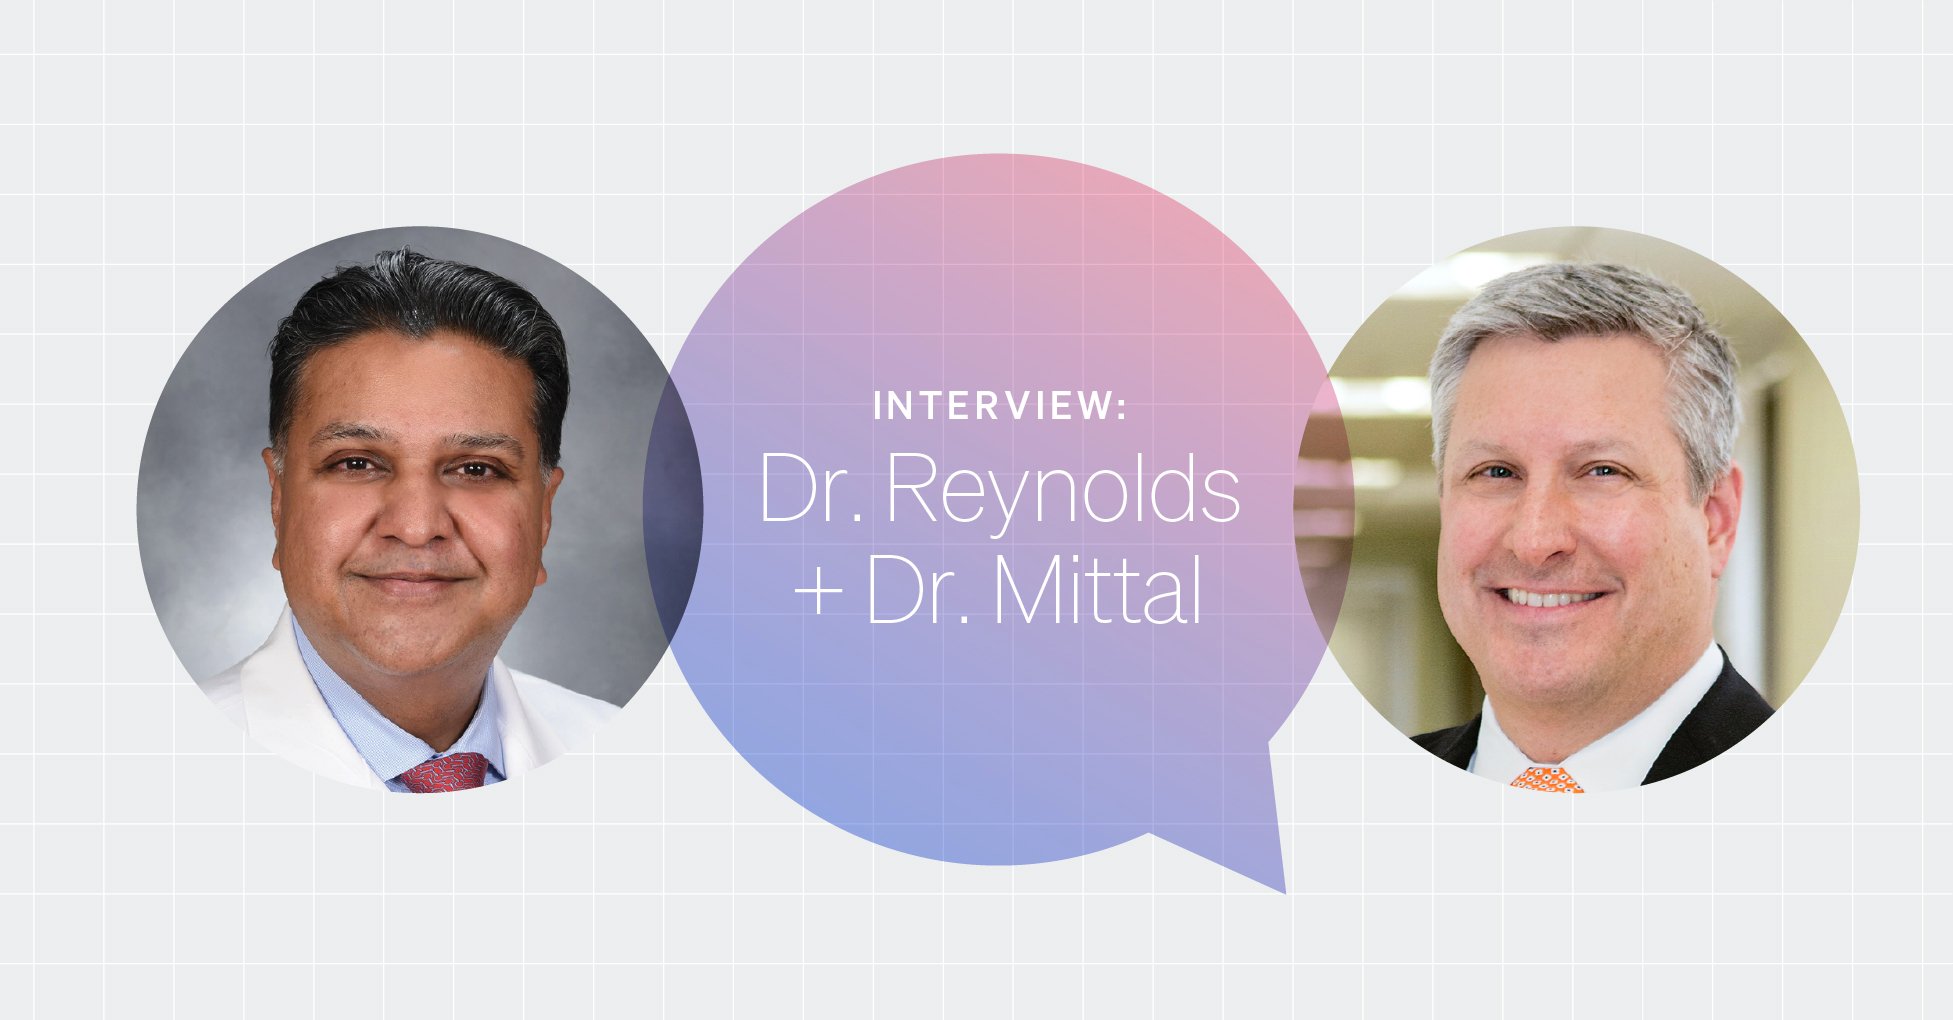 Light gray background with white grid lines. Light gray background with white grid lines. Circular headshot of Dr. Mittal on the left and Dr. Reynolds on the right. White text in a pink and purple text bubble between the images says, “INTERVIEW: Dr Reynolds & Dr. Mittal.” 